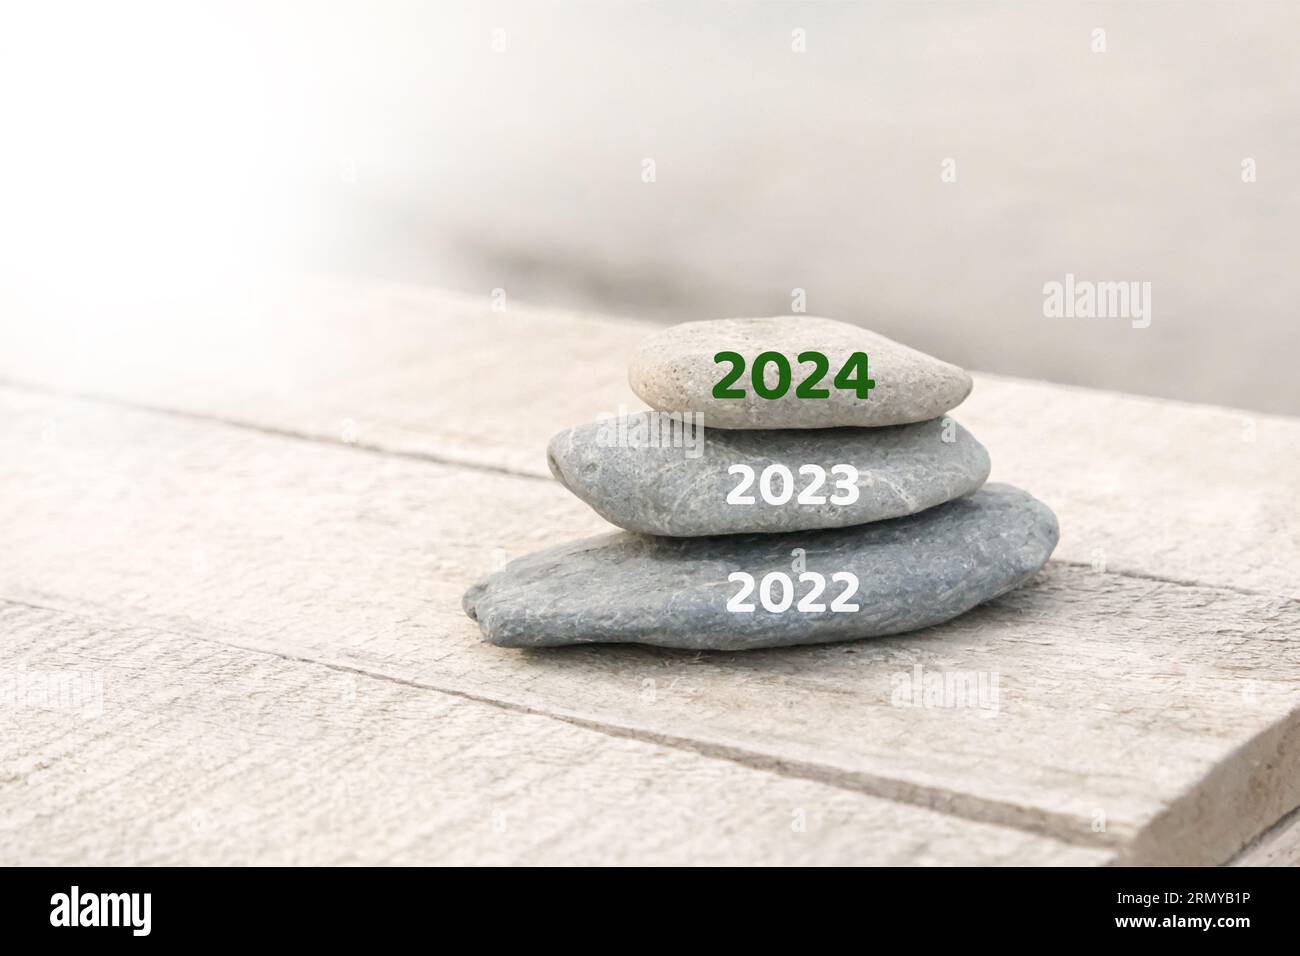 Happy new year, 2024 replace old 2023. New Year 2024 is coming concept idea on beach. Creative photo image can be used as display, printed canvas, web Stock Photo